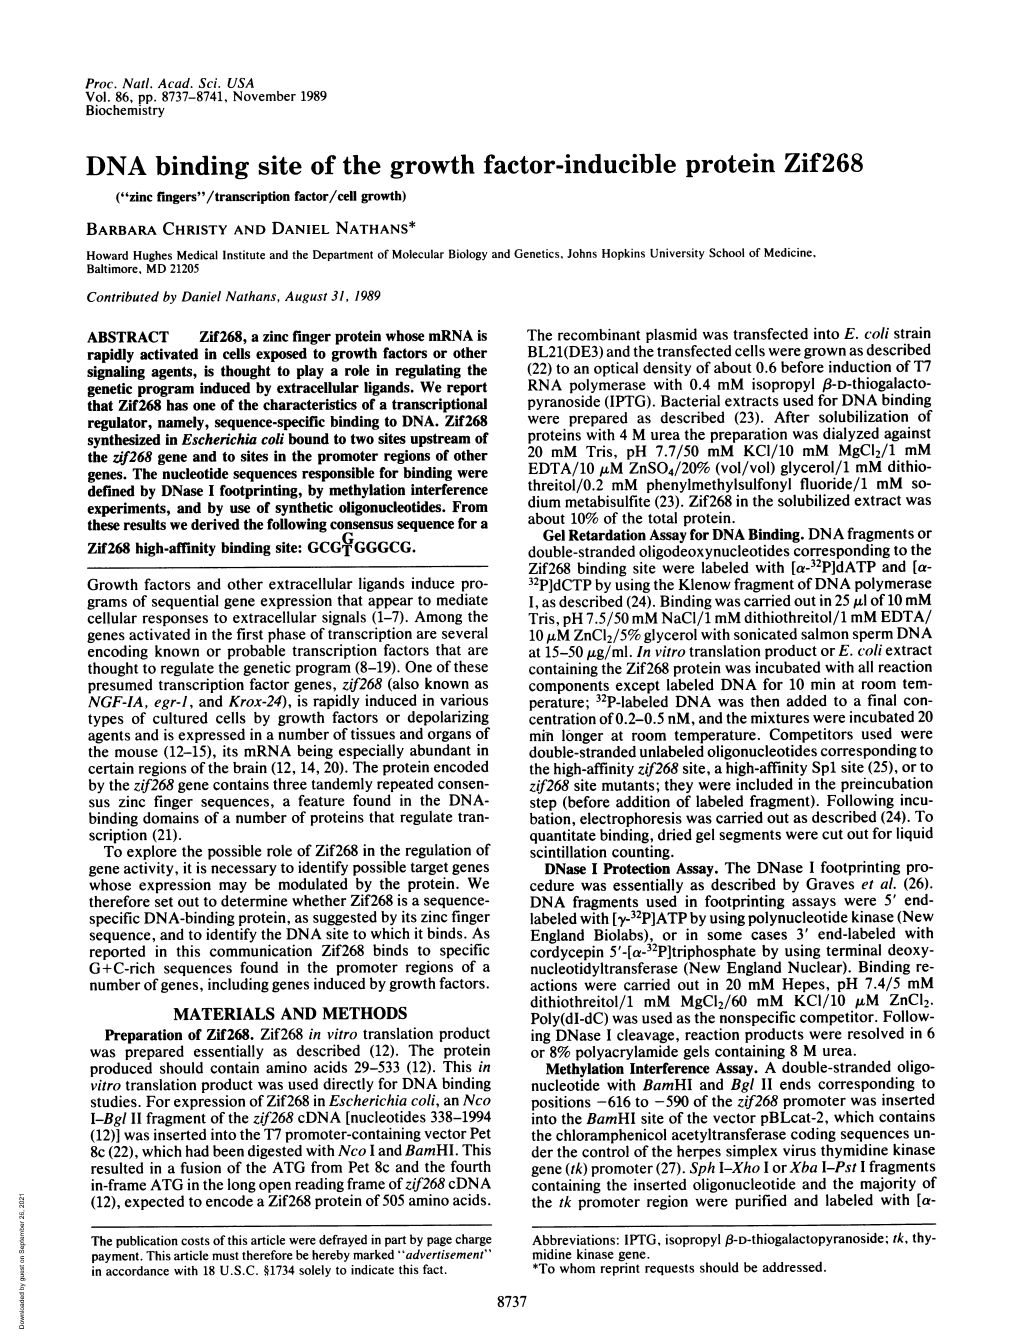 DNA Binding Site of the Growth Factor-Inducible Protein Zif268